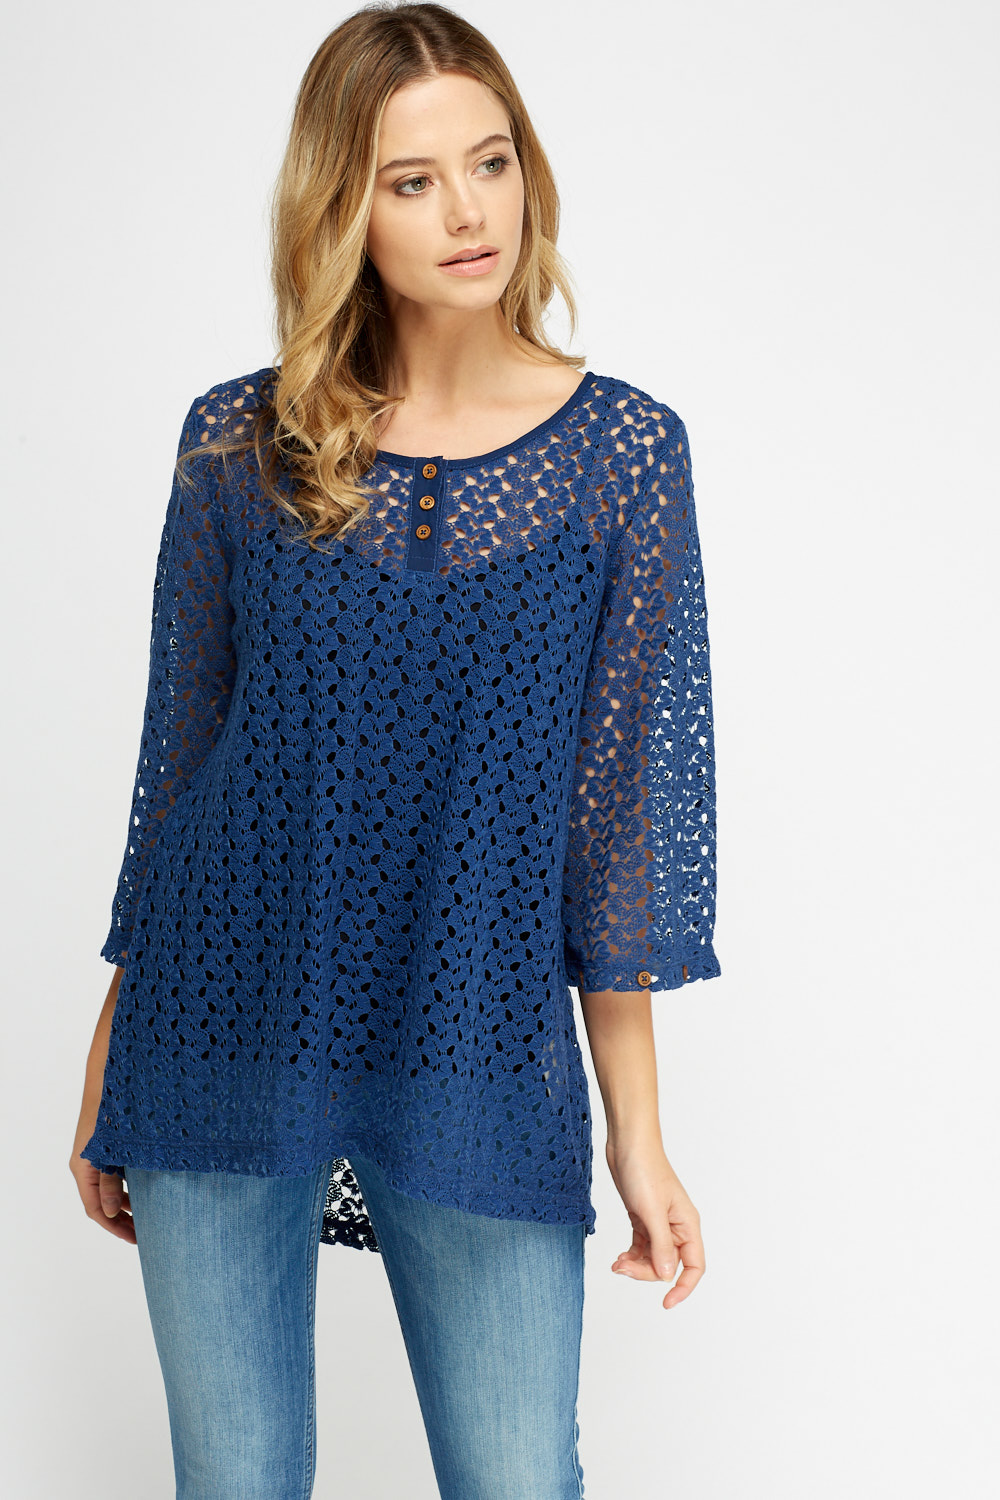 Detailed Back Mesh Tunic Top - Just $7